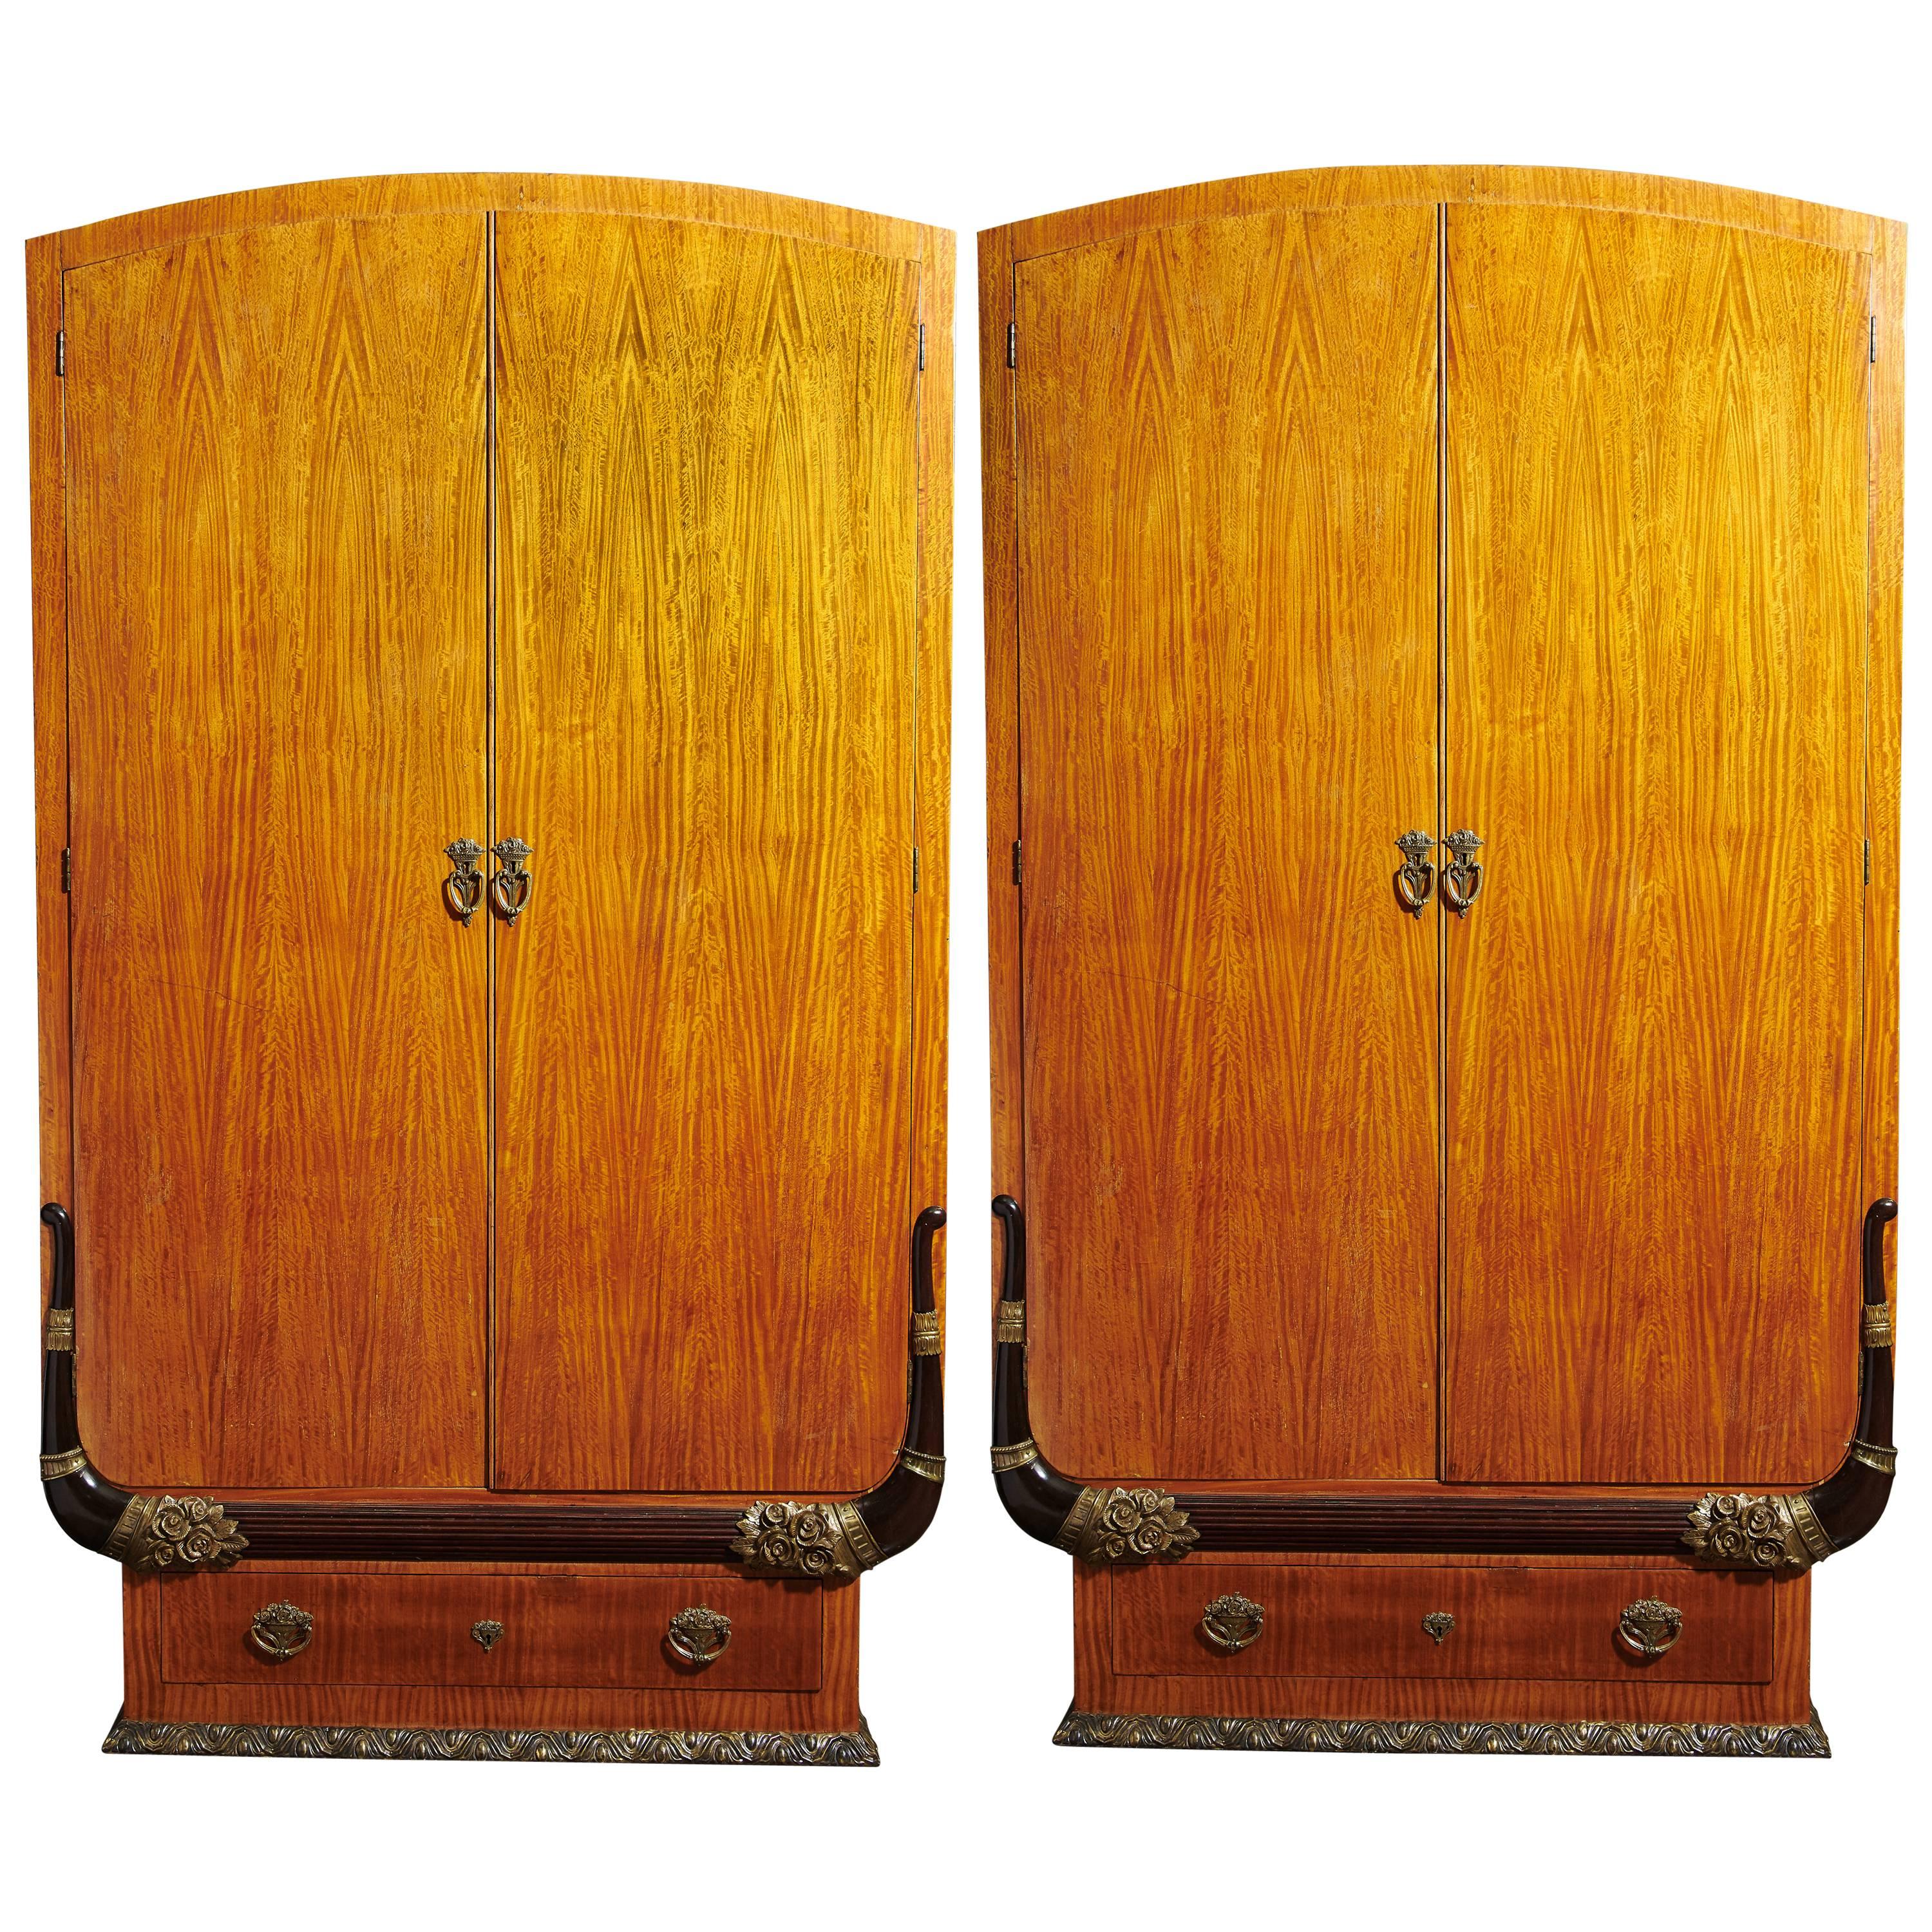 Pair of Art Deco Cabinets or Armoires in the Manner of Sue et Mare